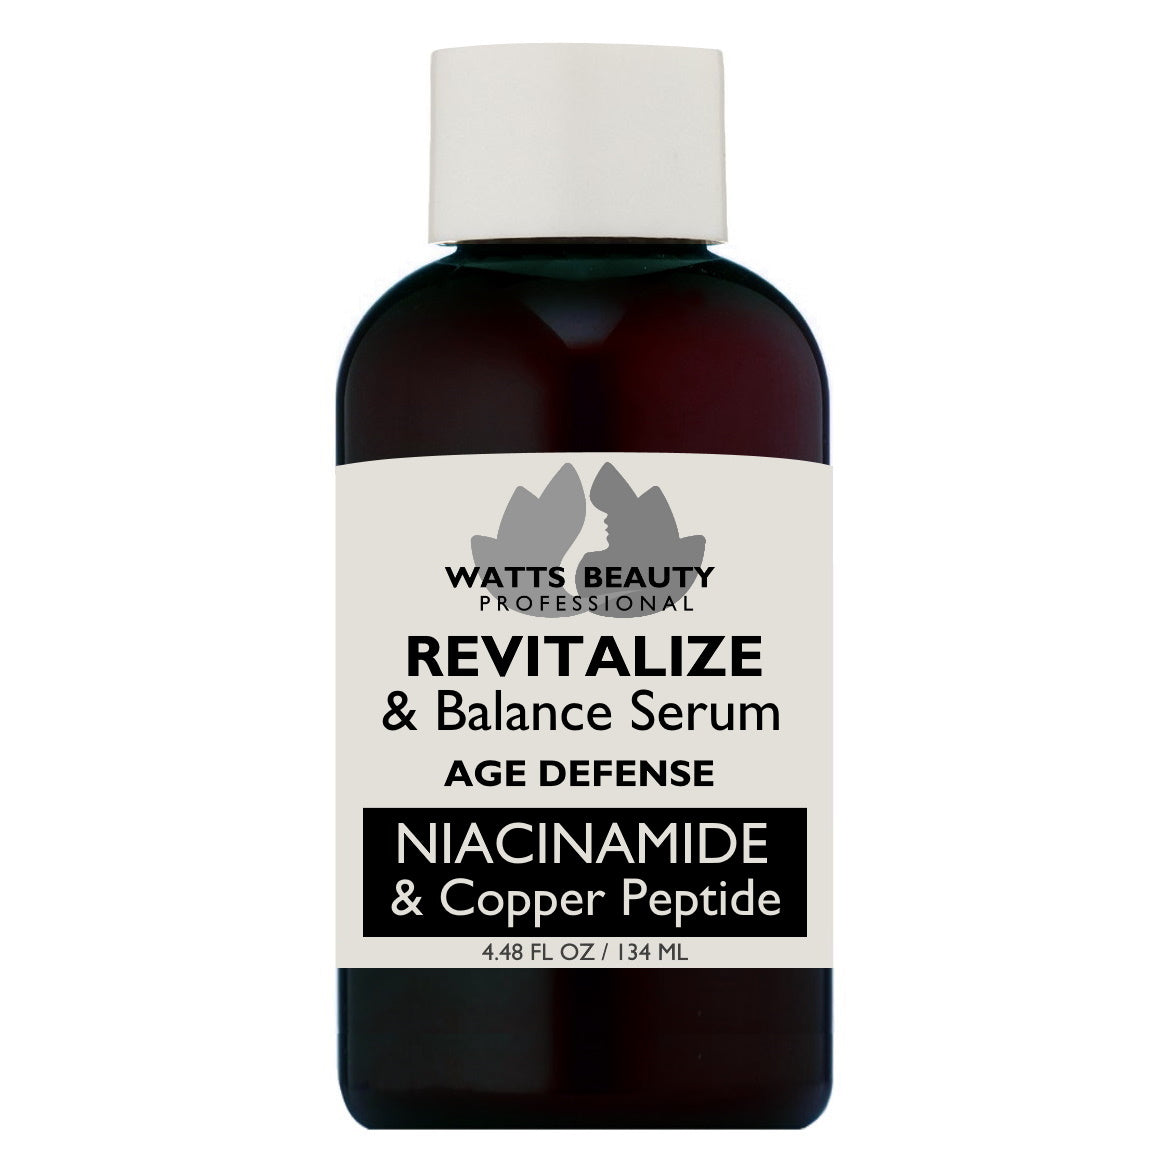 Large Refill 4.48 oz - Watts Beauty Revitalize and Balance Hybrid Cream - So, if you're looking to start each day with revitalized skin that is optimally balanced, then add this dynamic serum to your daily routine.